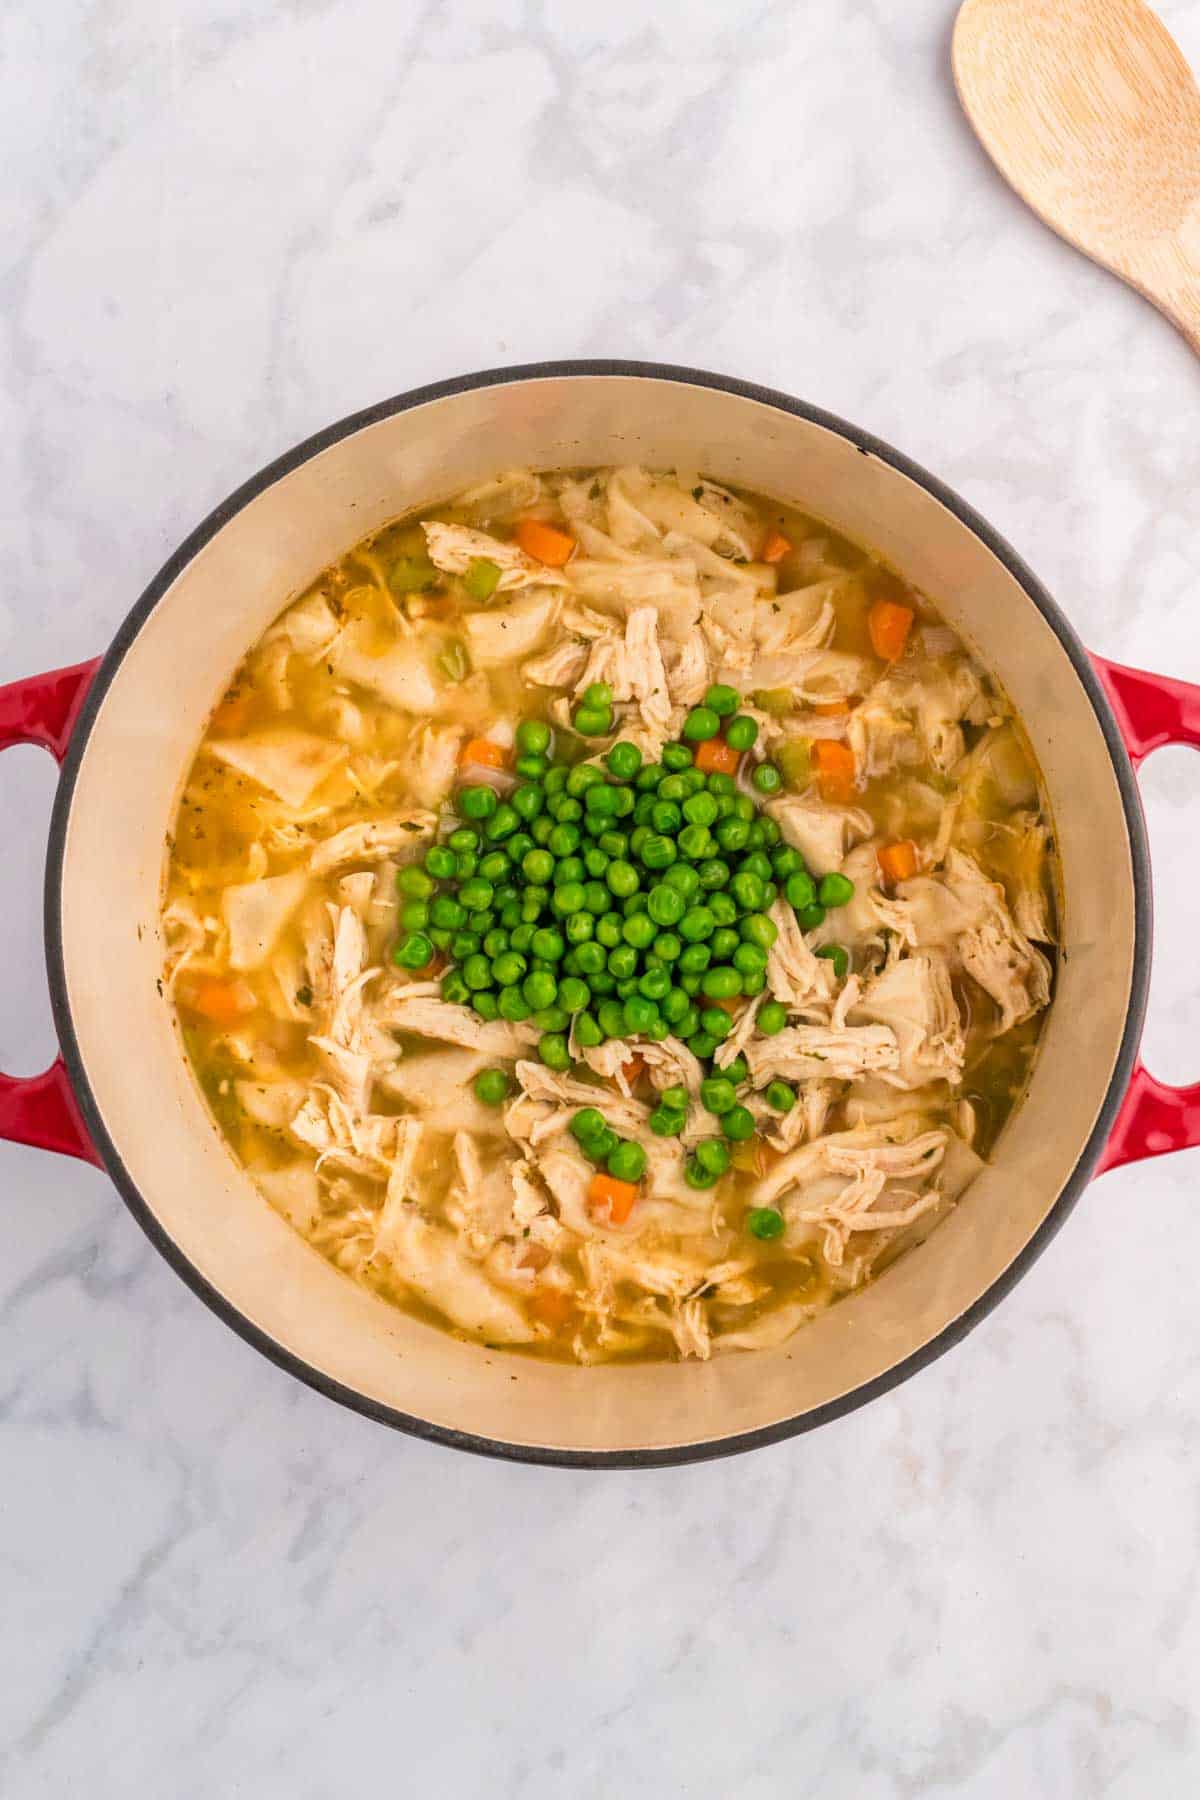 peas added to a pot with chicken and dumplings